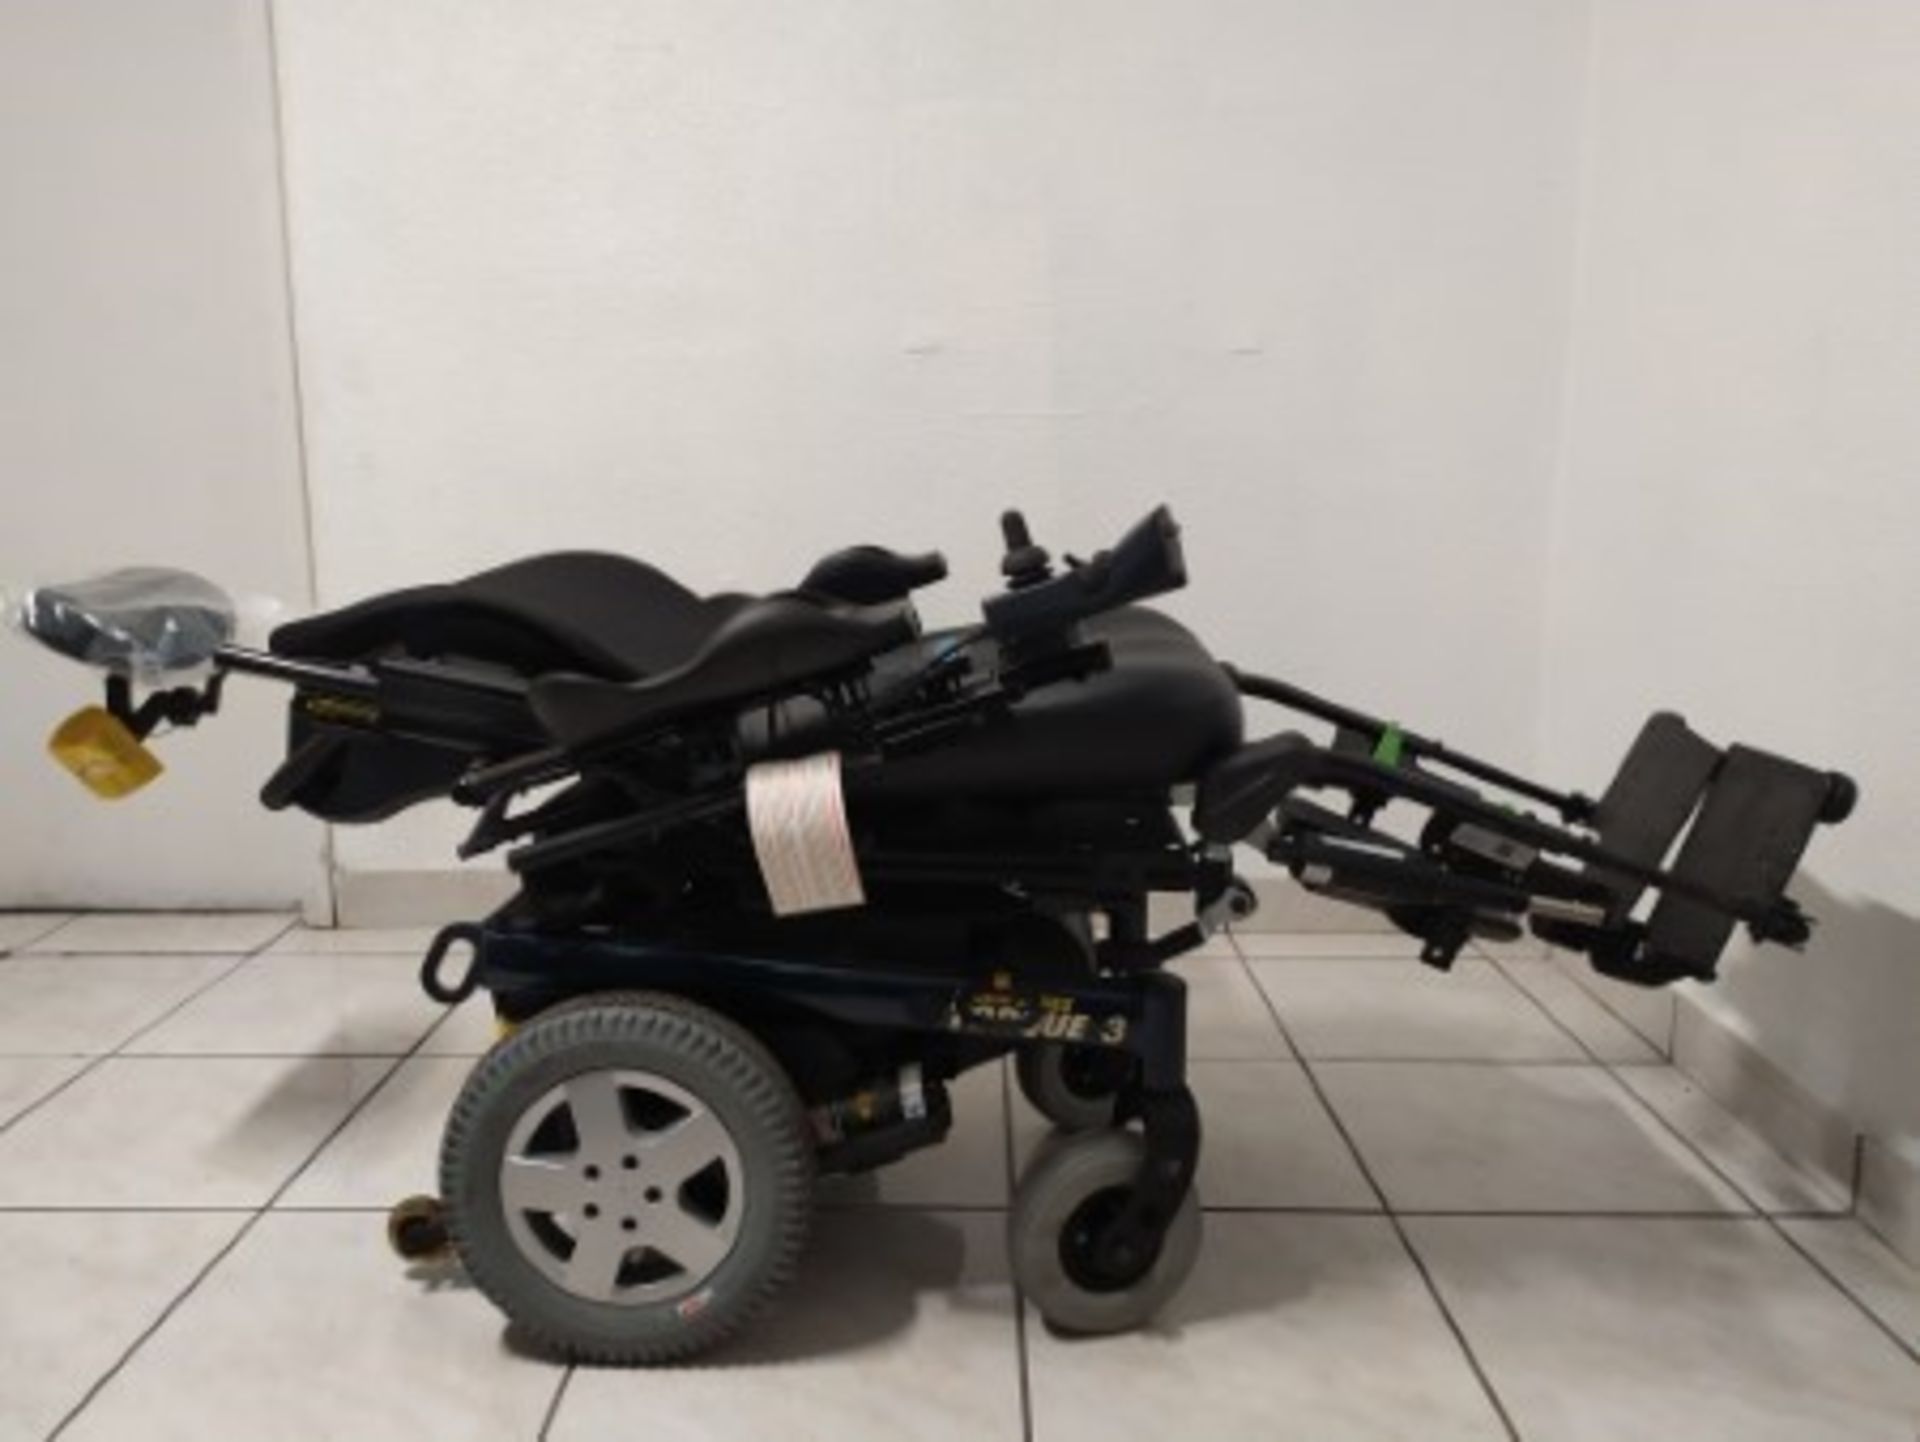 2014 INVACARE ATO-36TO3-MCG 6-WHEEL REHAB POWER CHAIR WITH JOYSTICK CONTROL, KEYBOARD, RECLINING SEA - Image 8 of 9